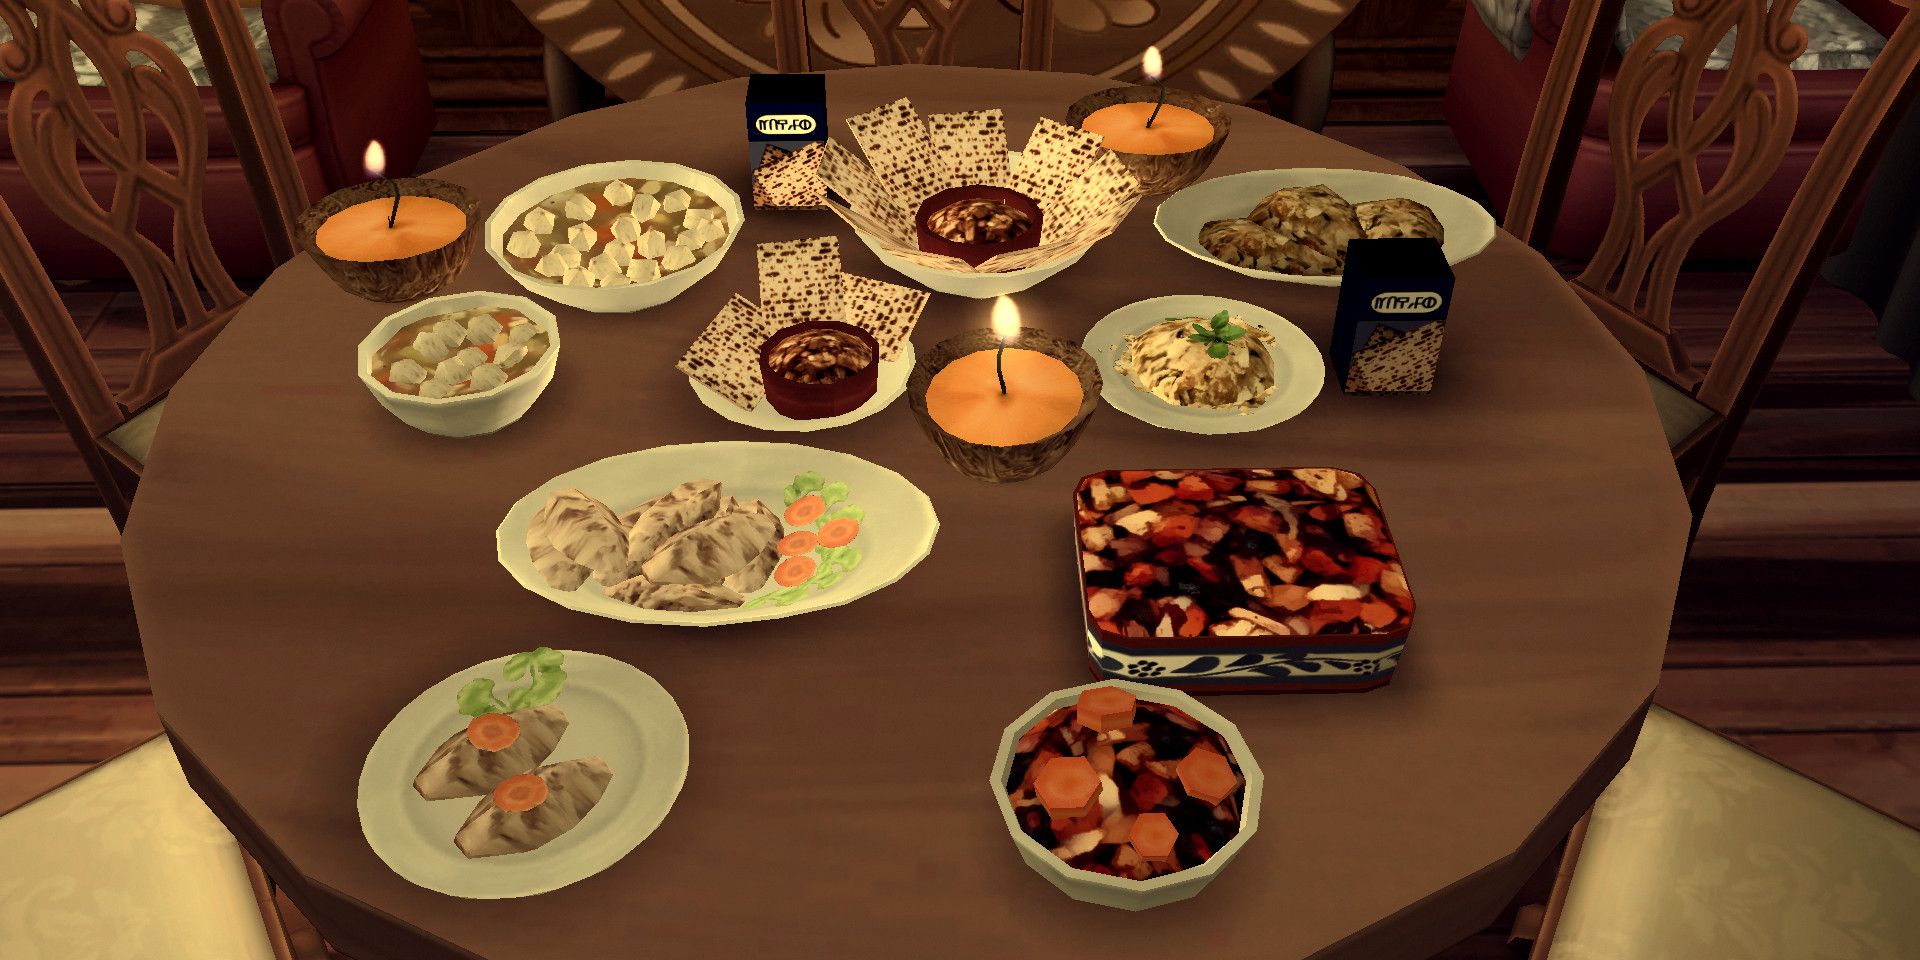 A round table full of low-poly foods traditionally served at Passover.